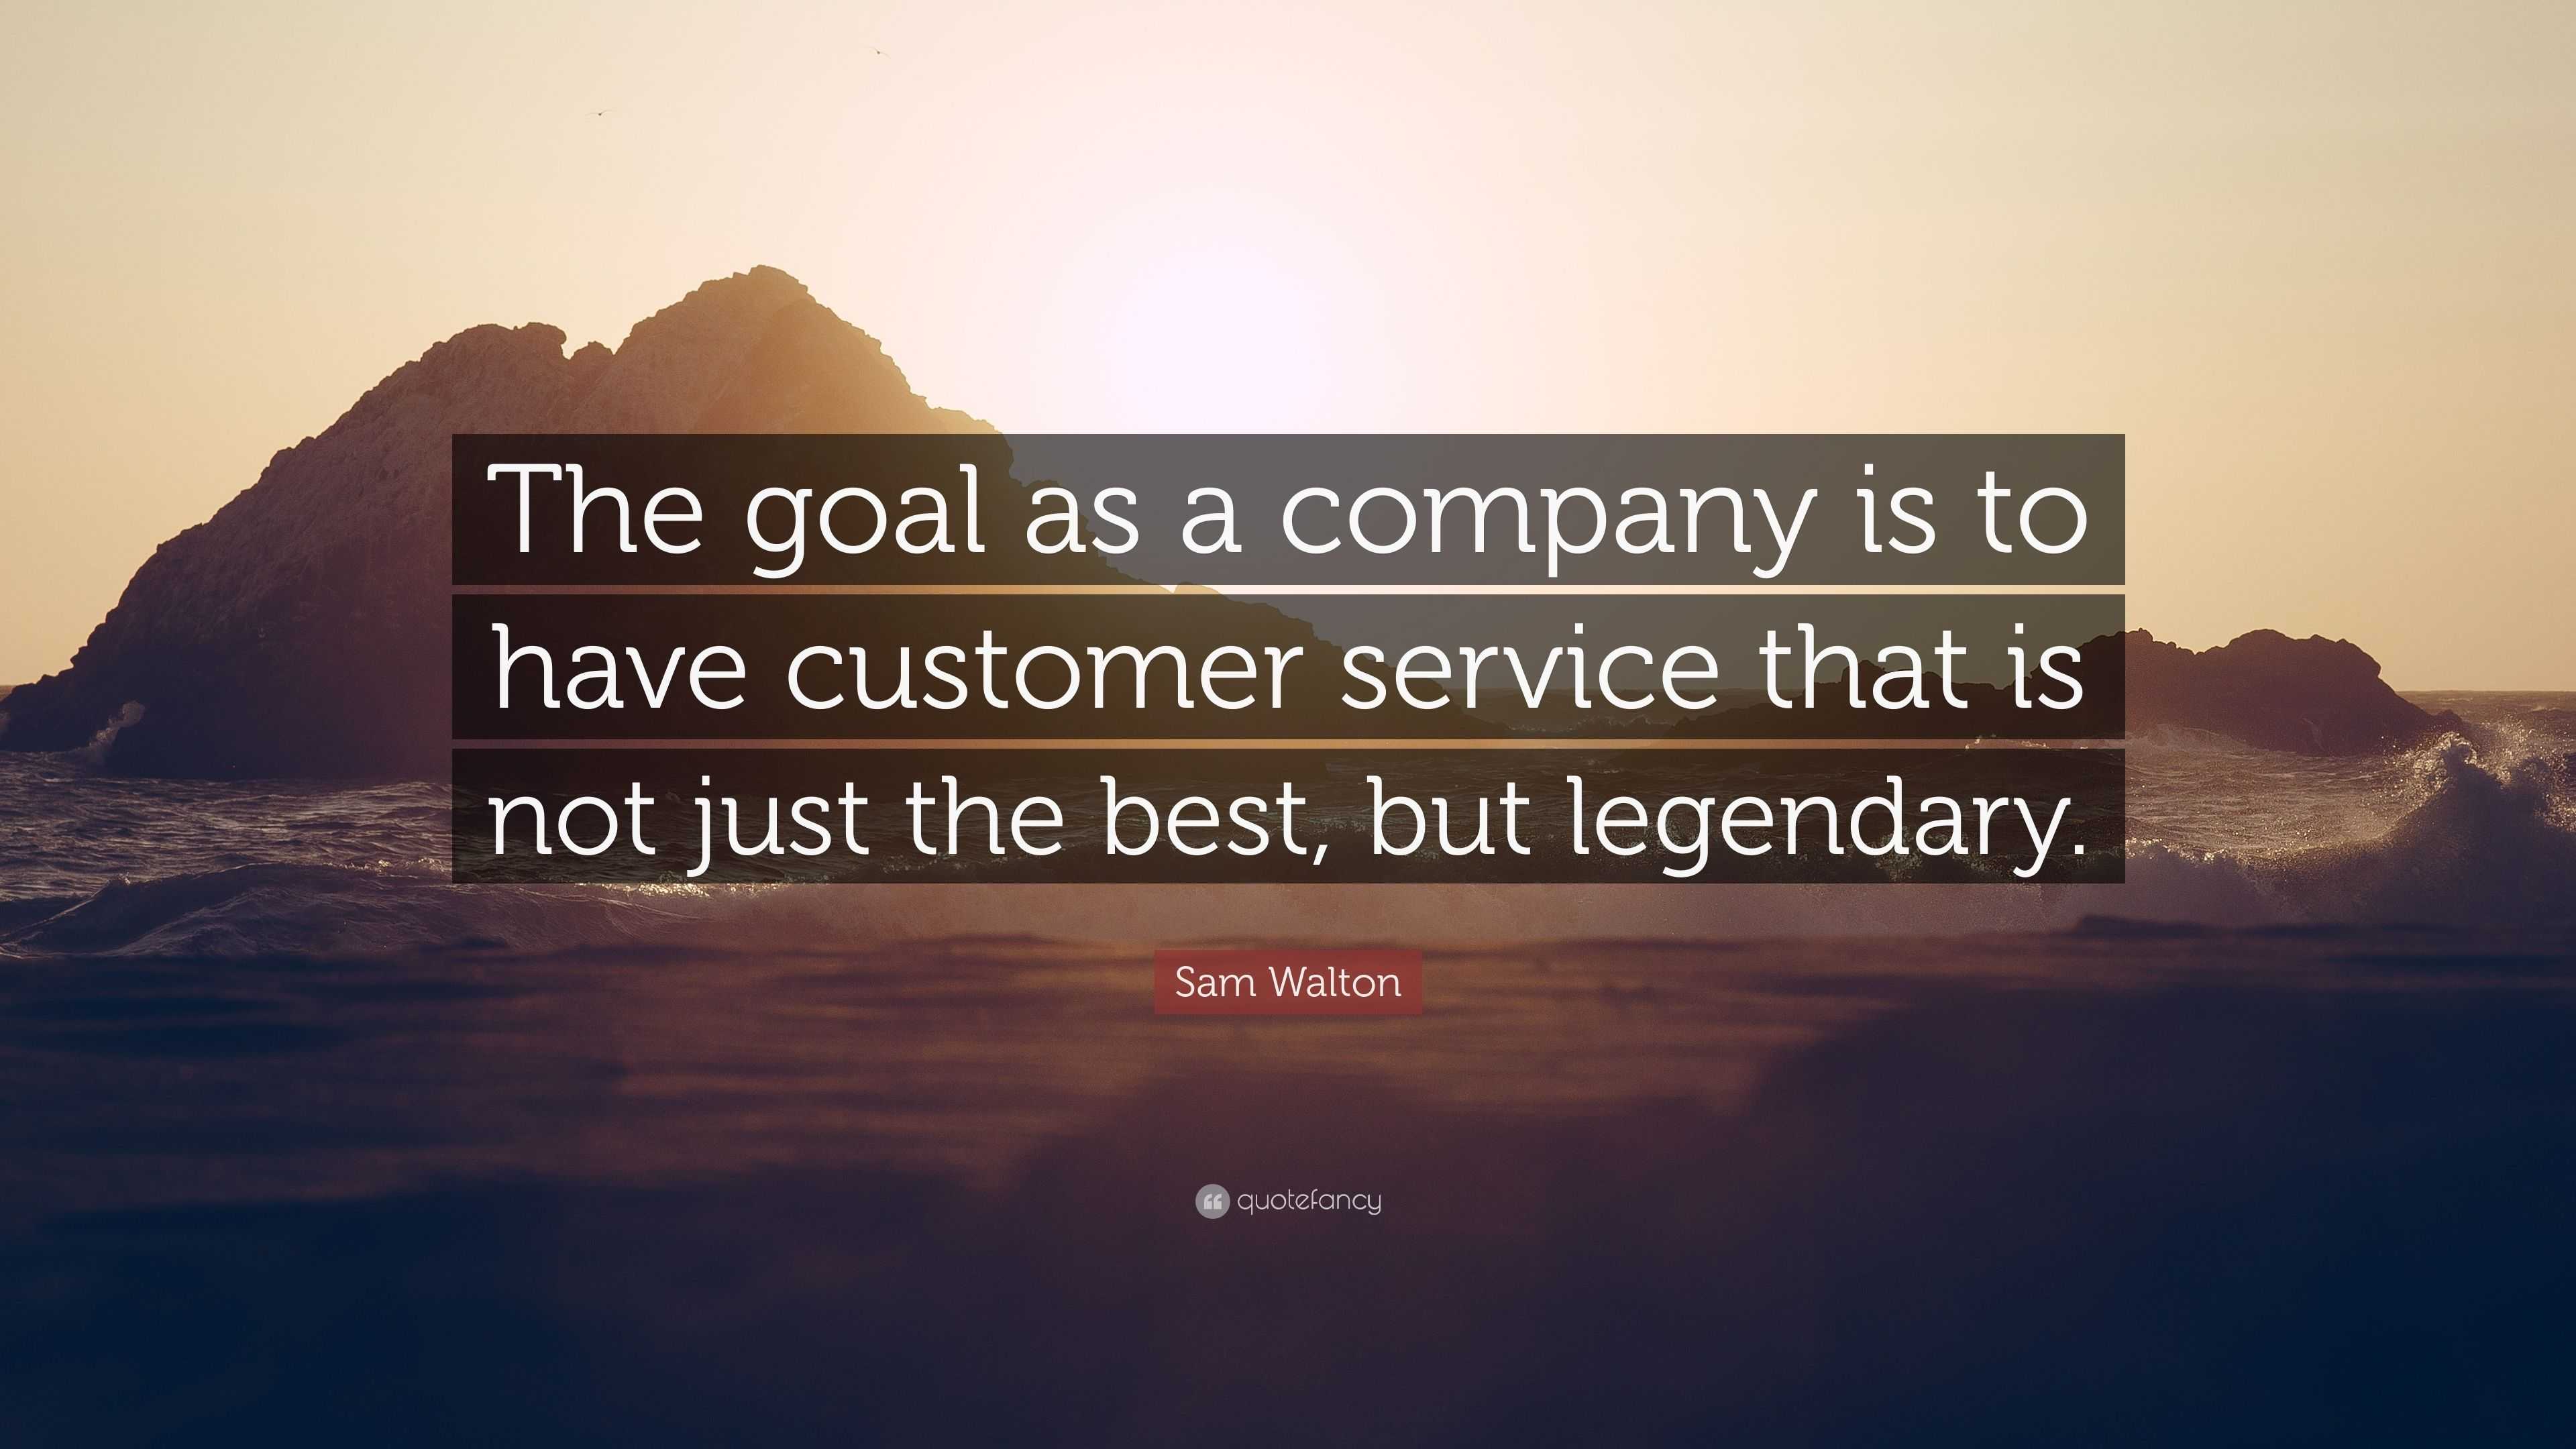 Sam Walton Quote “The goal as a company is to have customer service